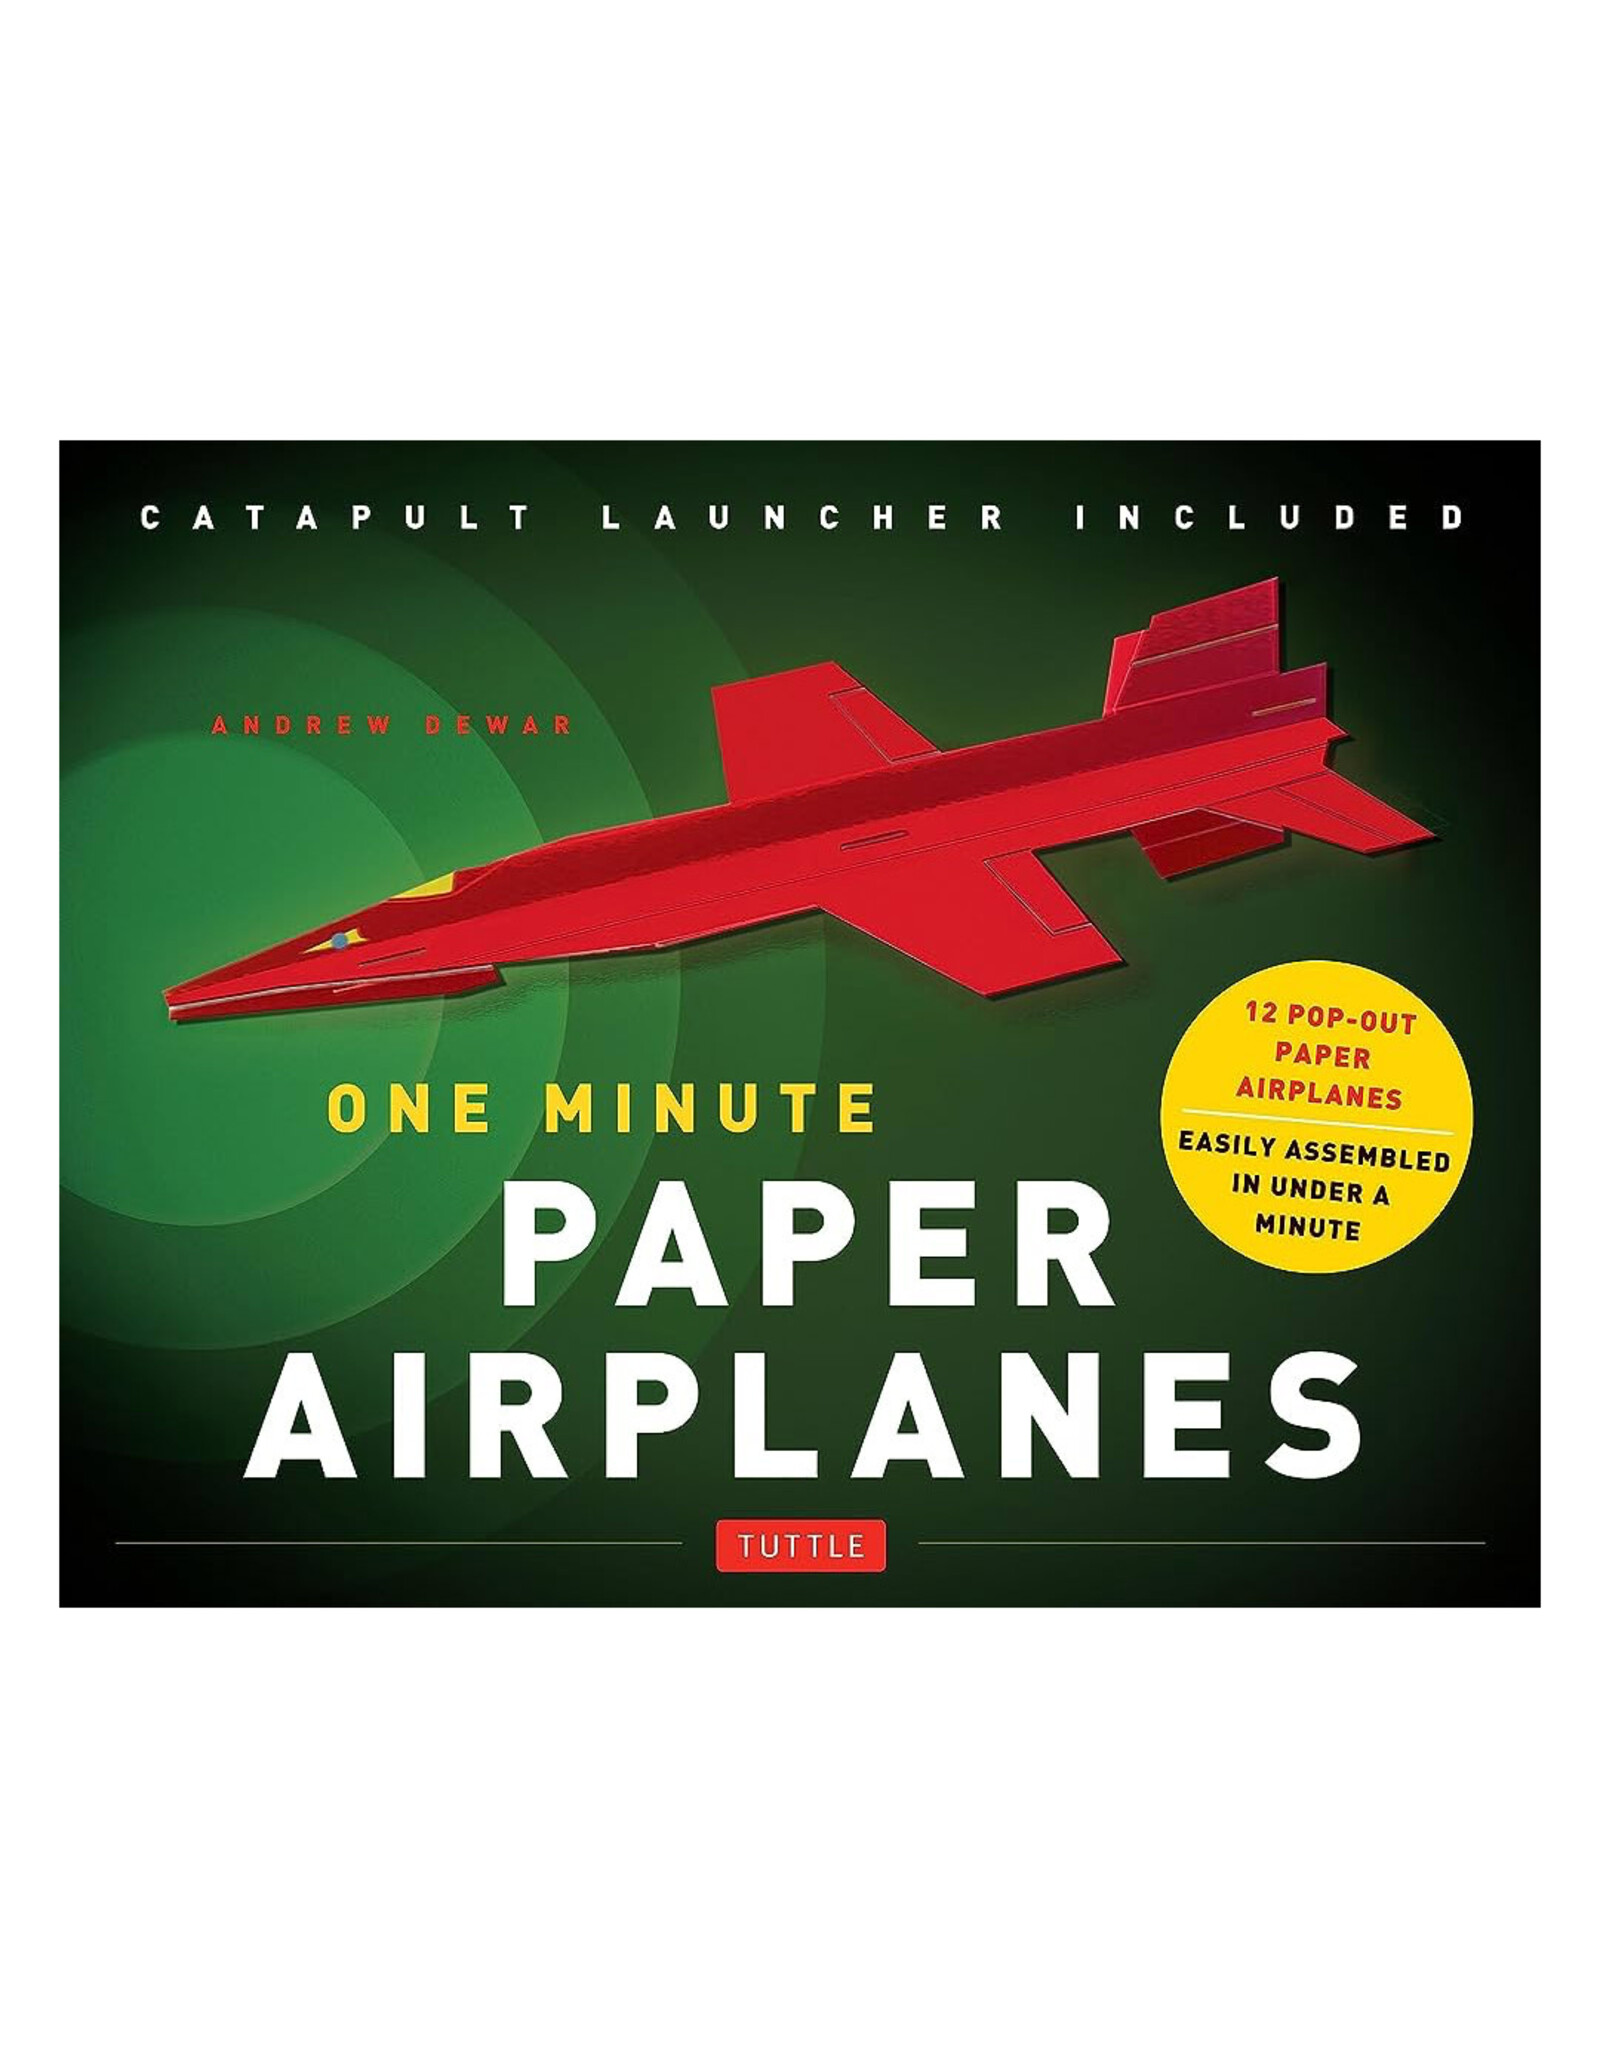 One Minute Paper Airplanes